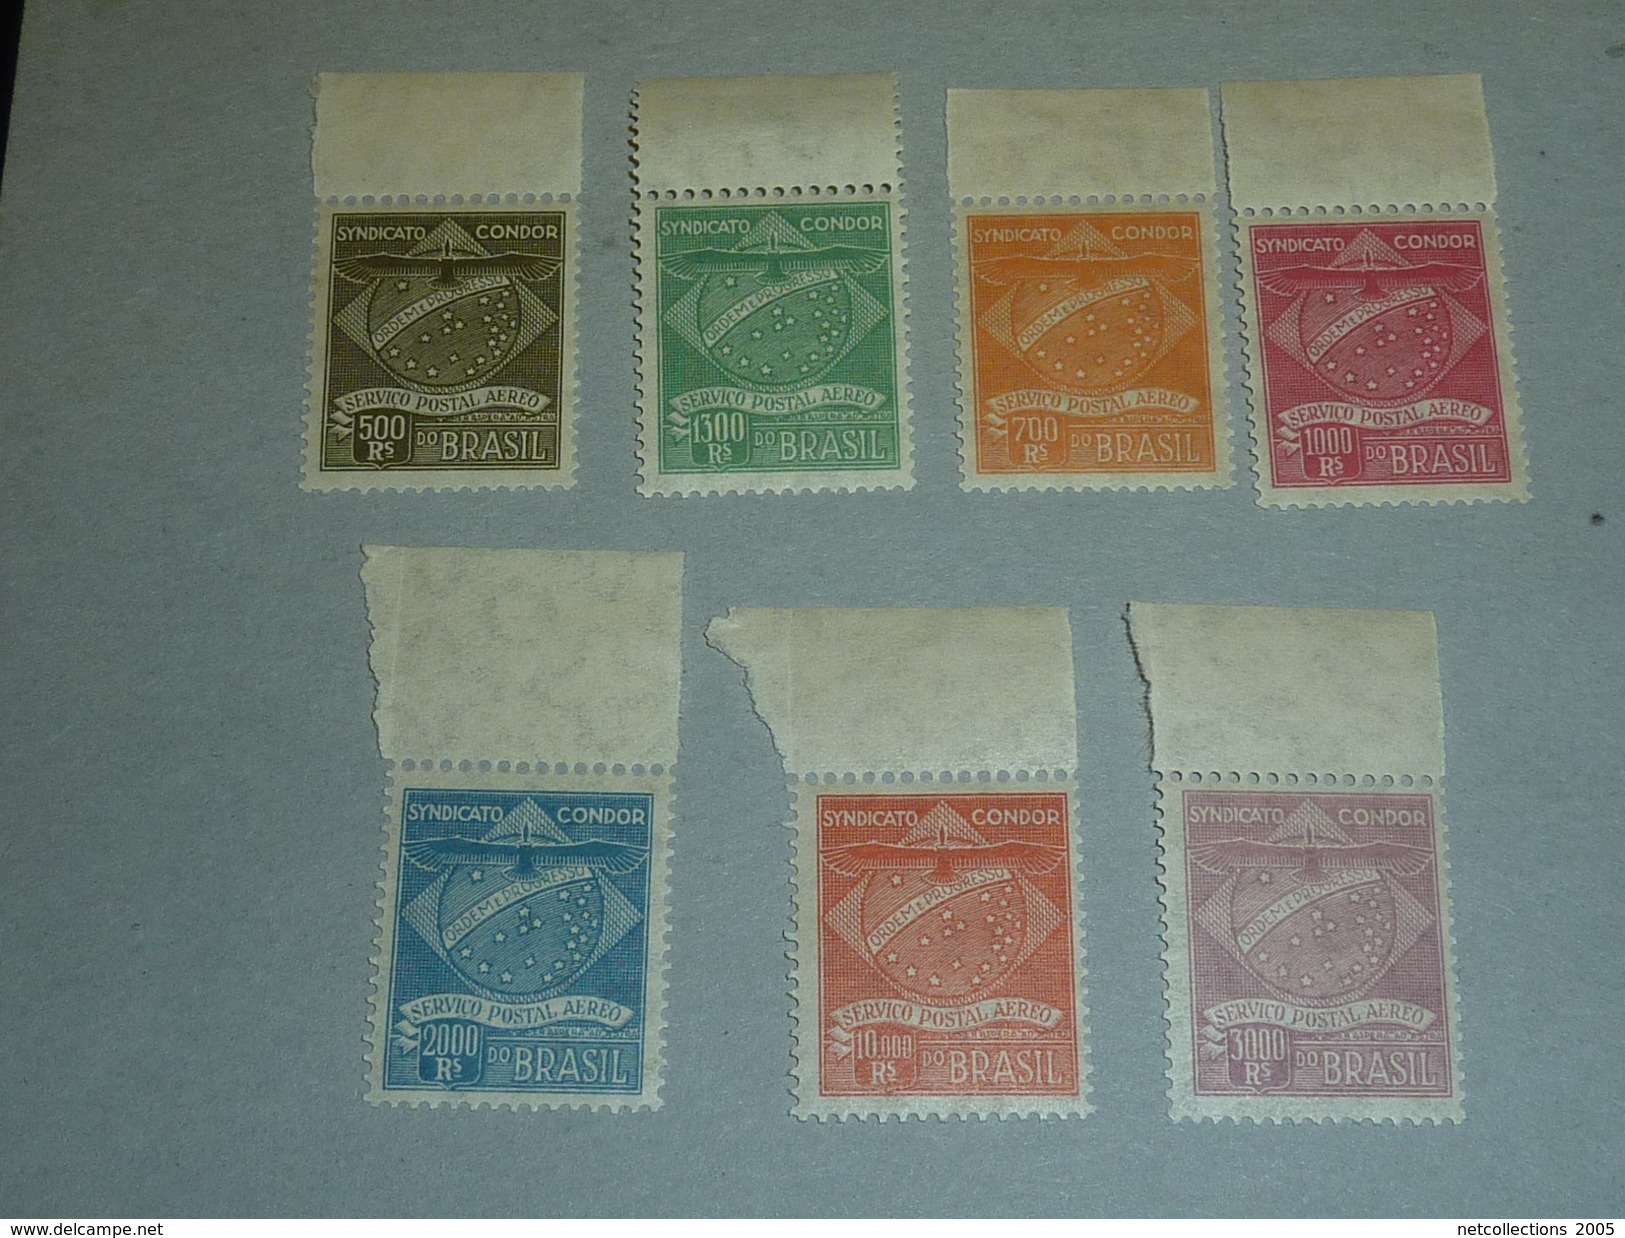 BRESIL - TIMBRES DE COMPAGNIE PRIVEES - COMPAGNIE CONDOR N°1 à 7   (C.V) - Airmail (Private Companies)